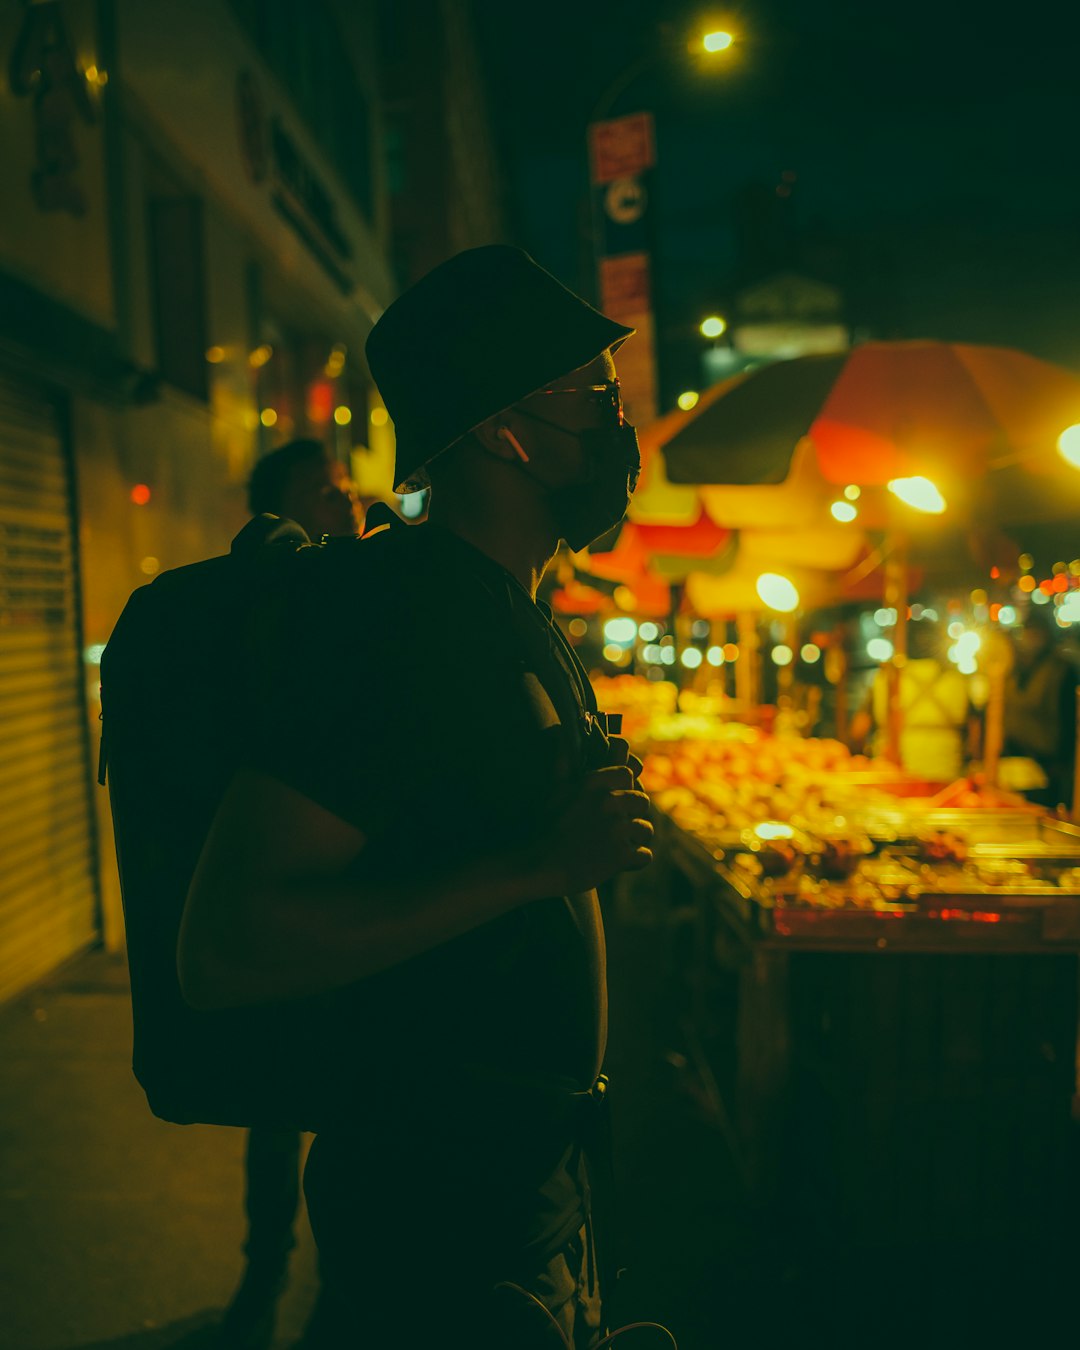 man in black shirt and black cap standing in front of food stall during night time